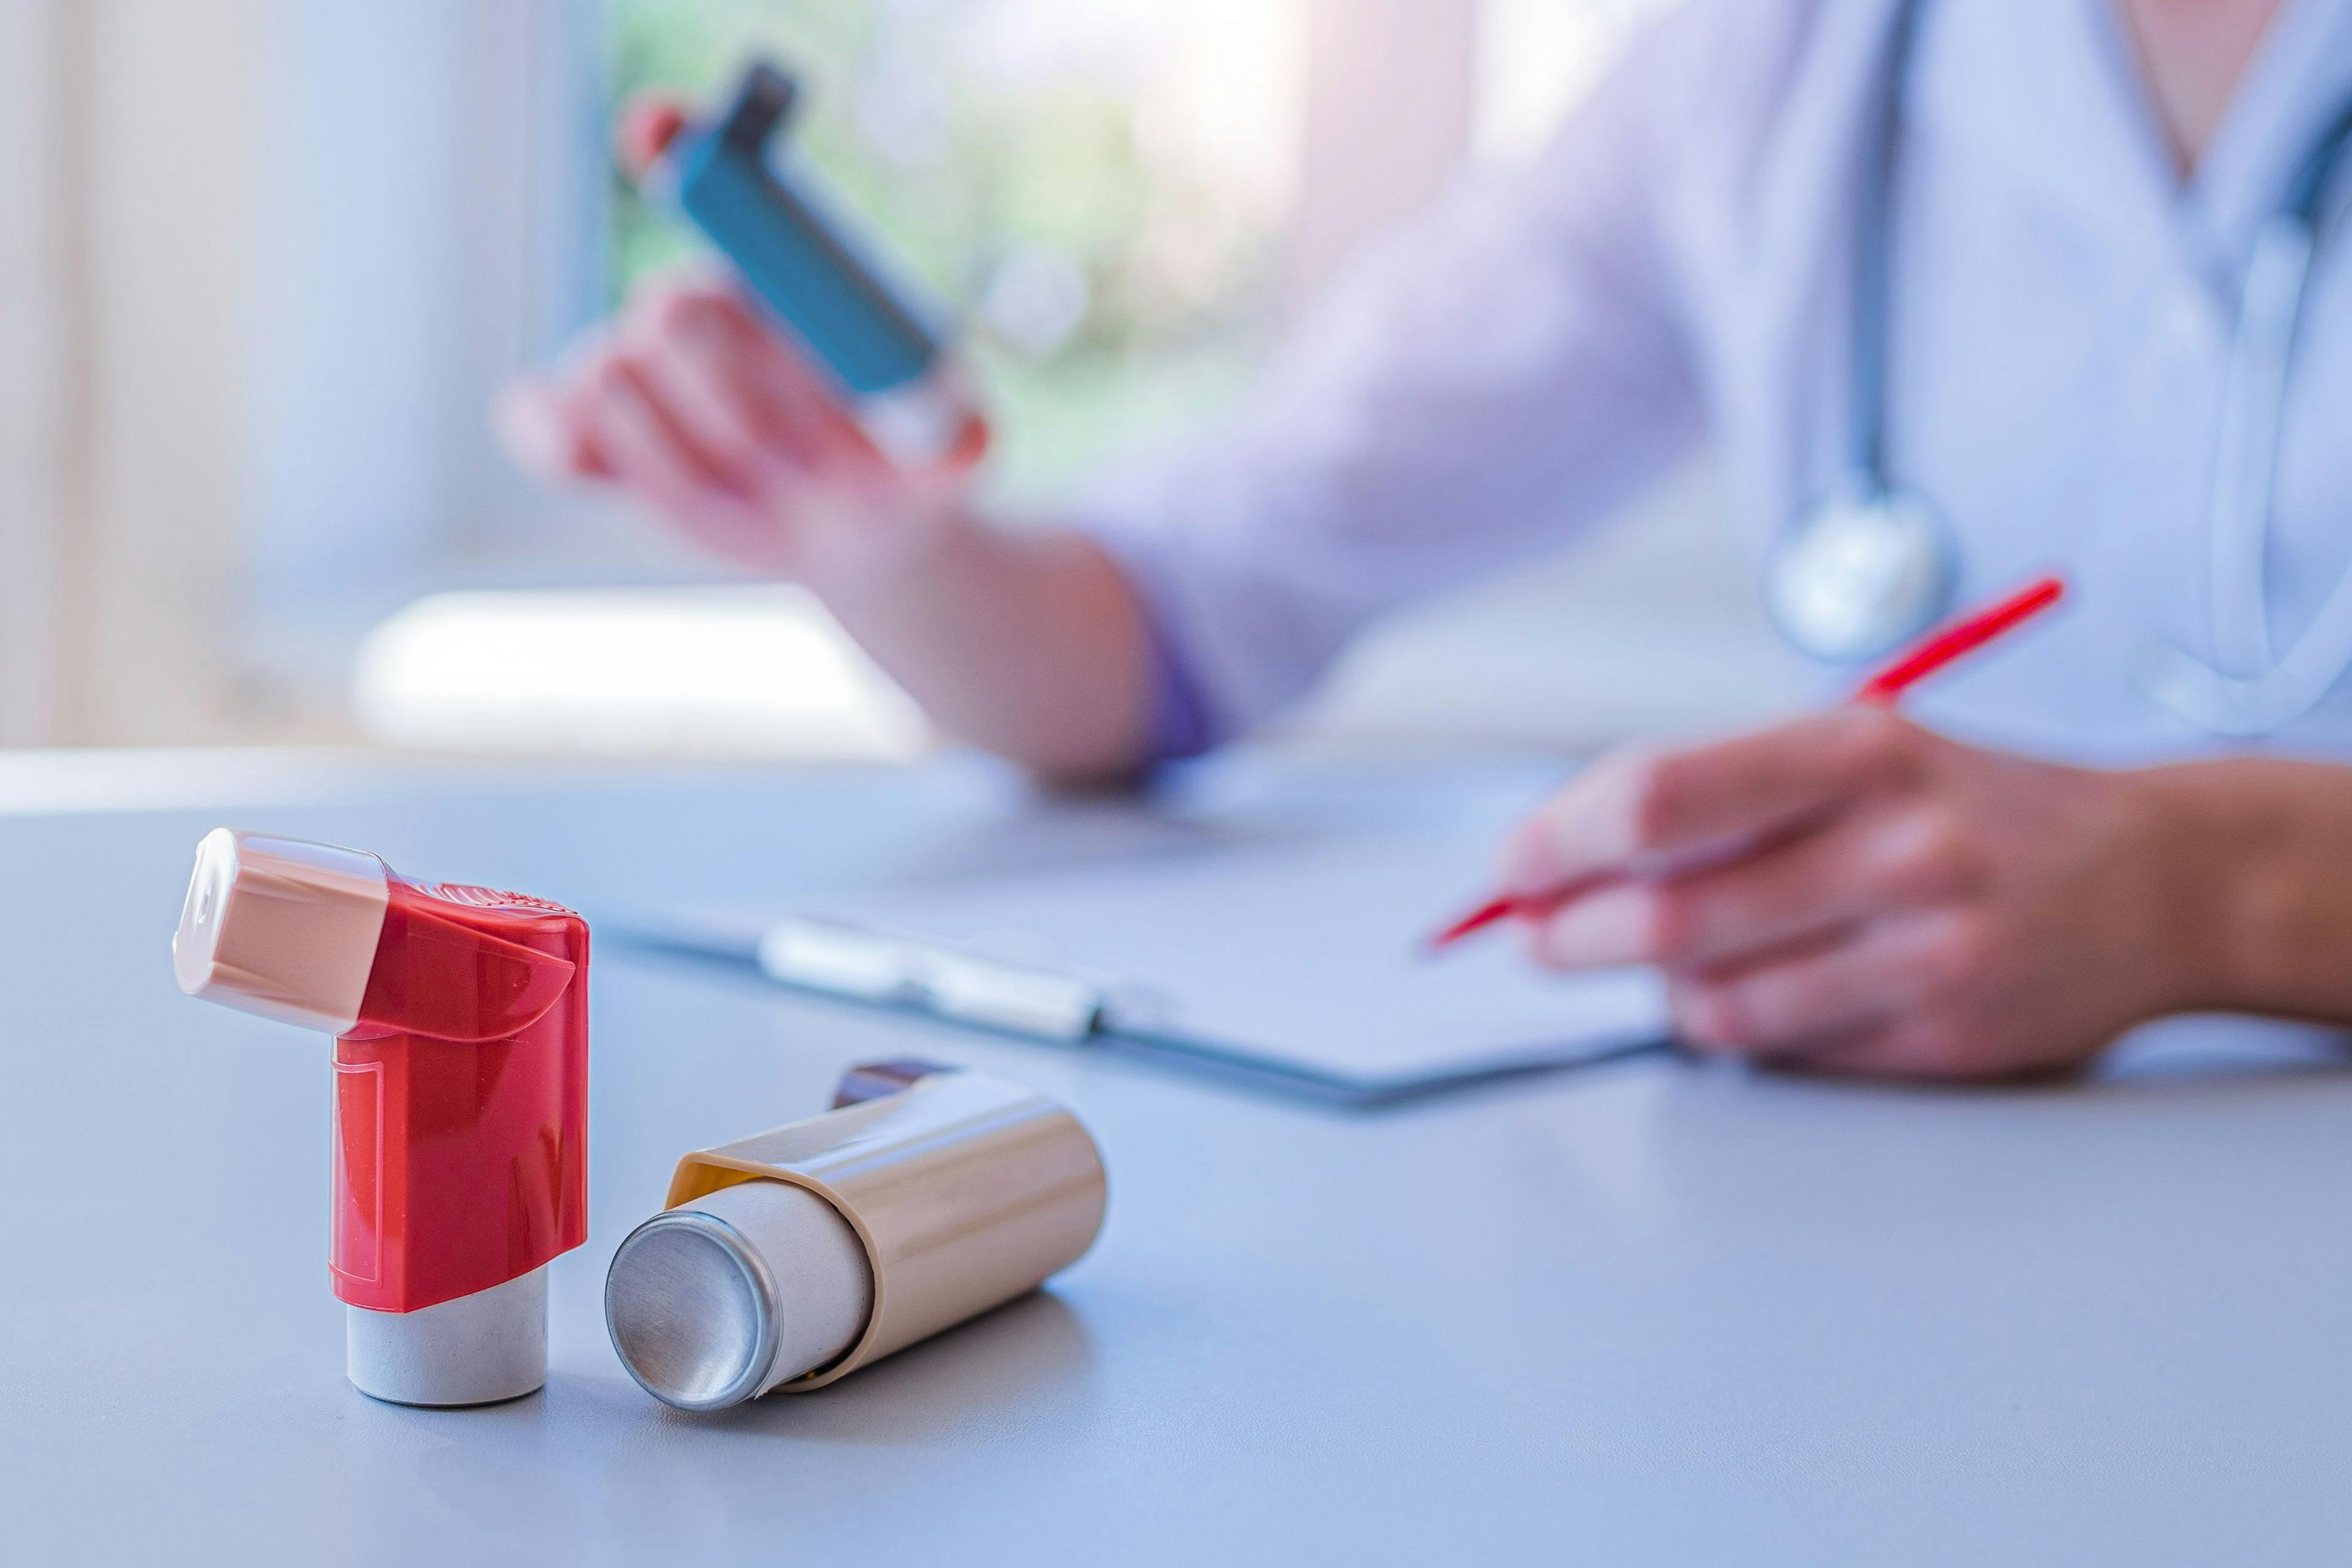 Lower Education a Risk Factor for Uncontrolled Asthma in Adults